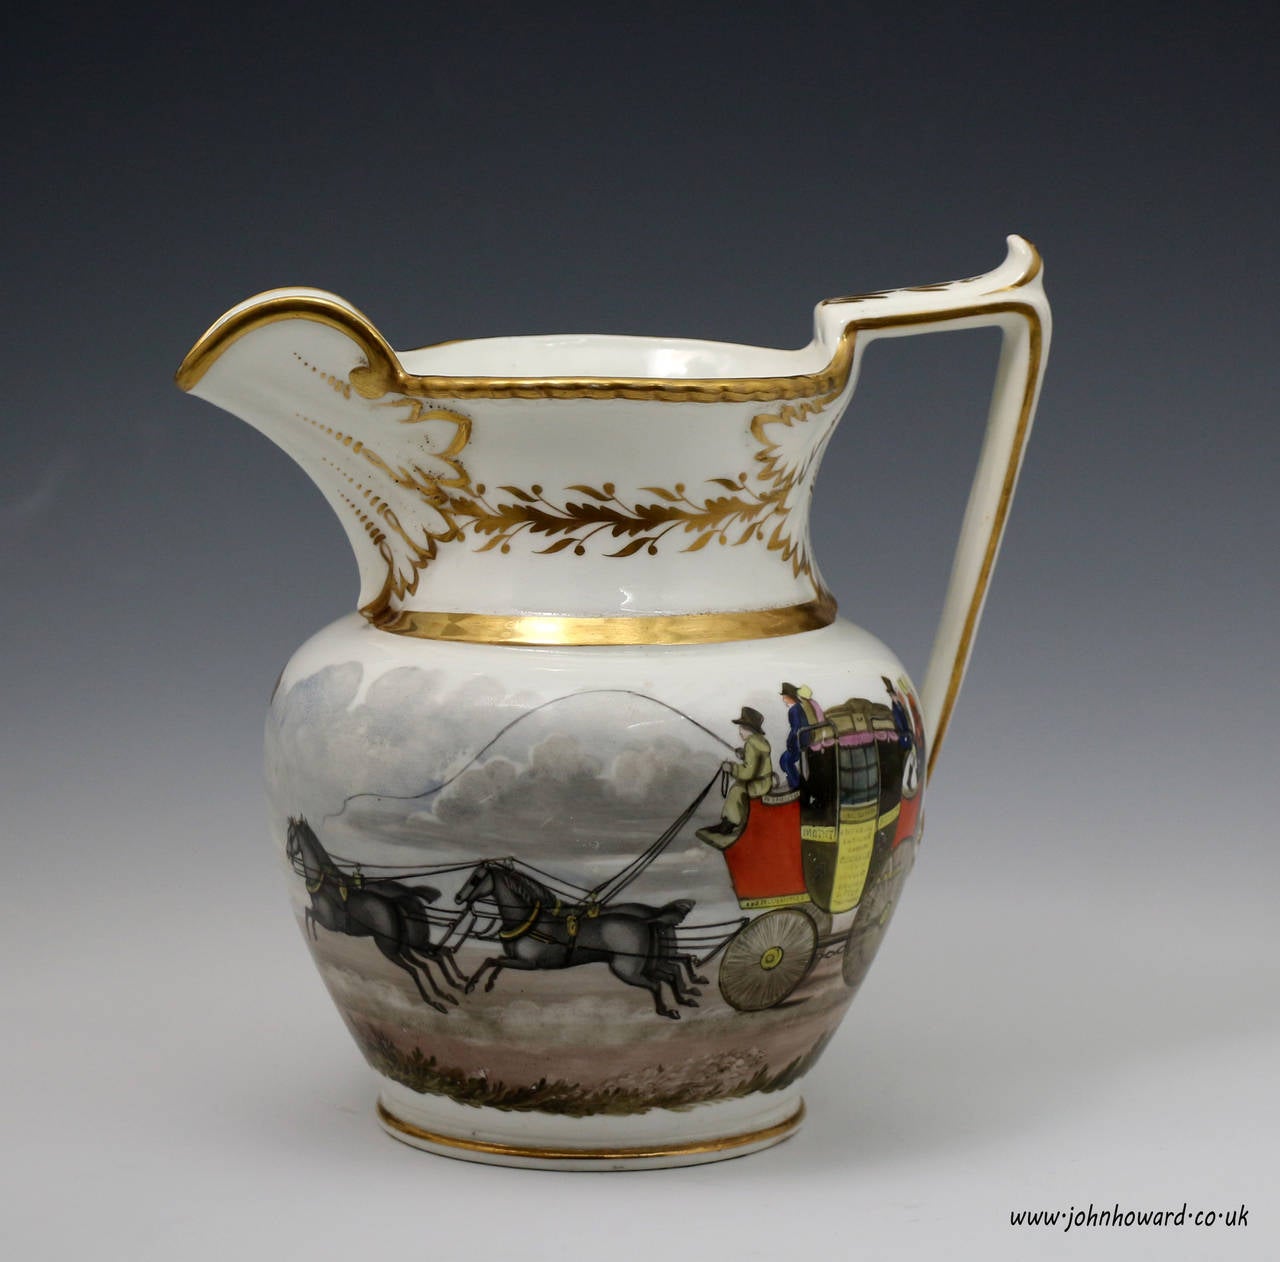 A fine quality antique pitcher with hand decorated coaching scene. 
Made in the early 19th century.